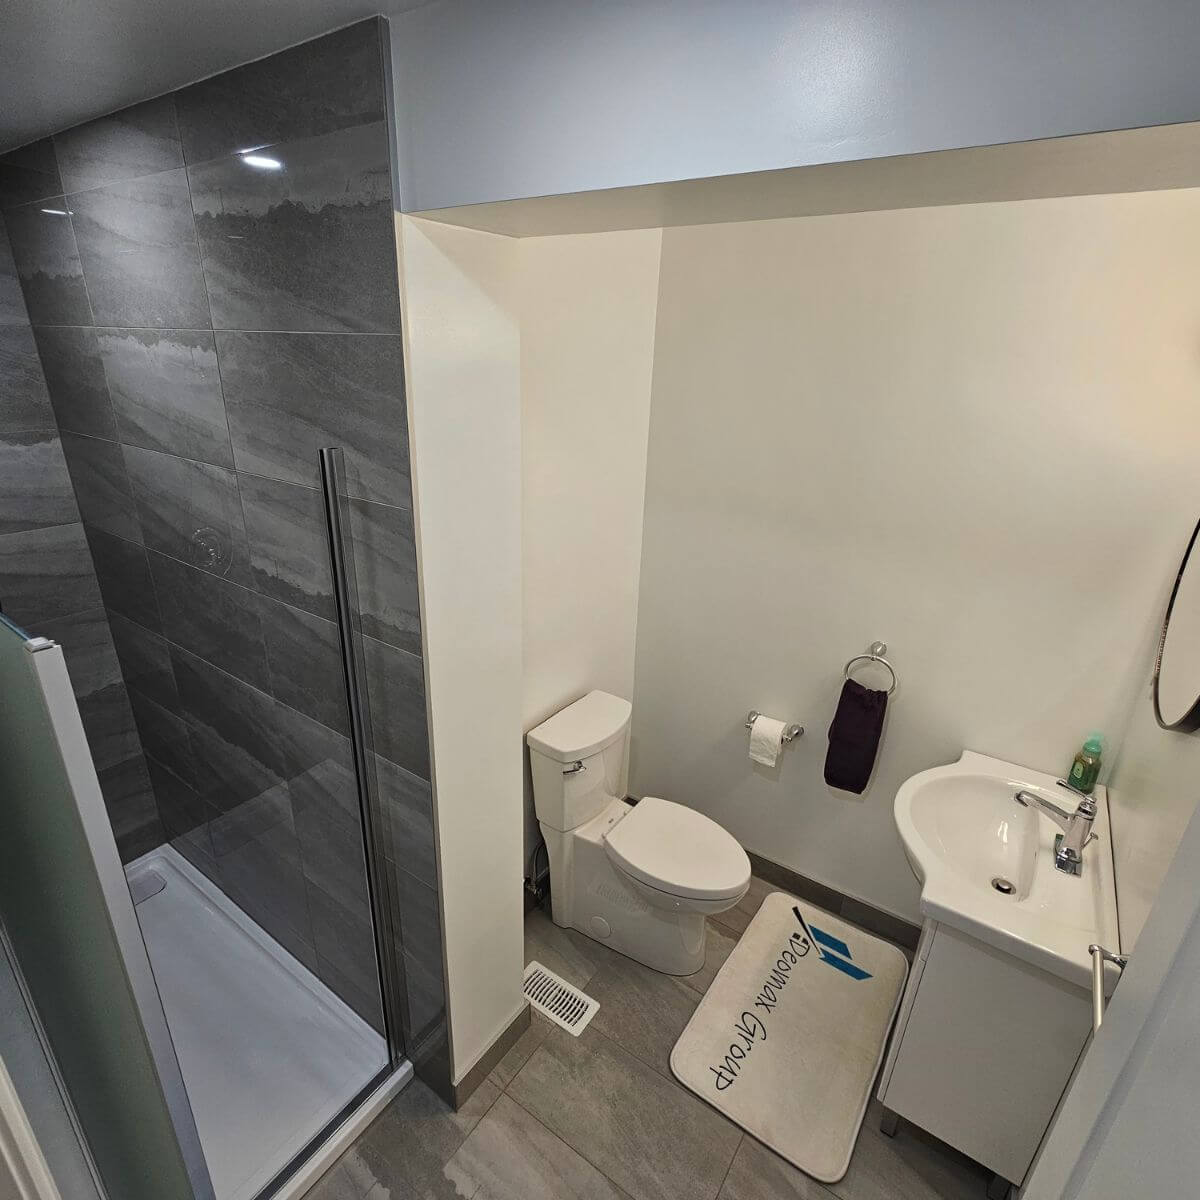 New washroom project in Mississauga